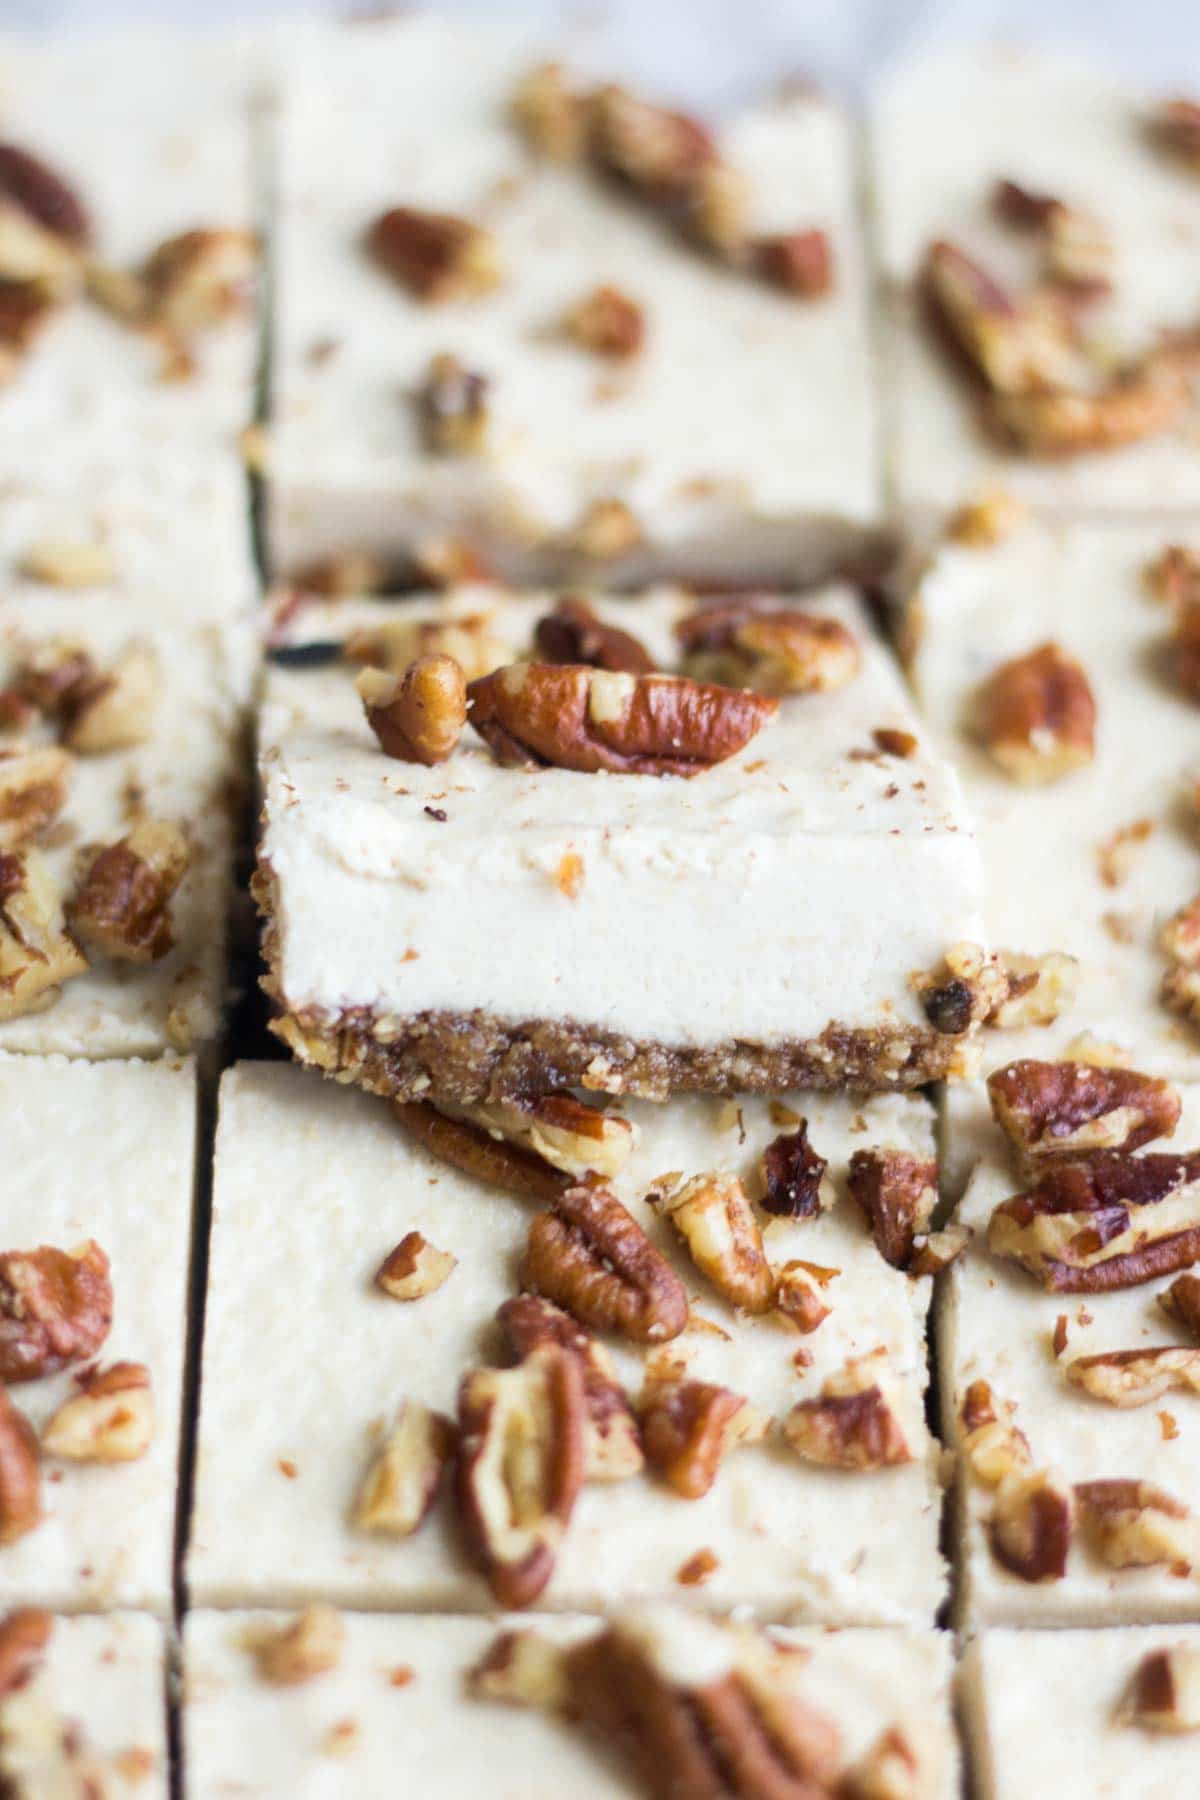 Smooth and creamy, these turtle vegan cheesecake bars are an easy and no bake healthy dessert. The crust is made with pecans and dates and the silky vegan cheesecake is topped with paleo caramel and pecans. You won't believe how yummy an easy it is to make!